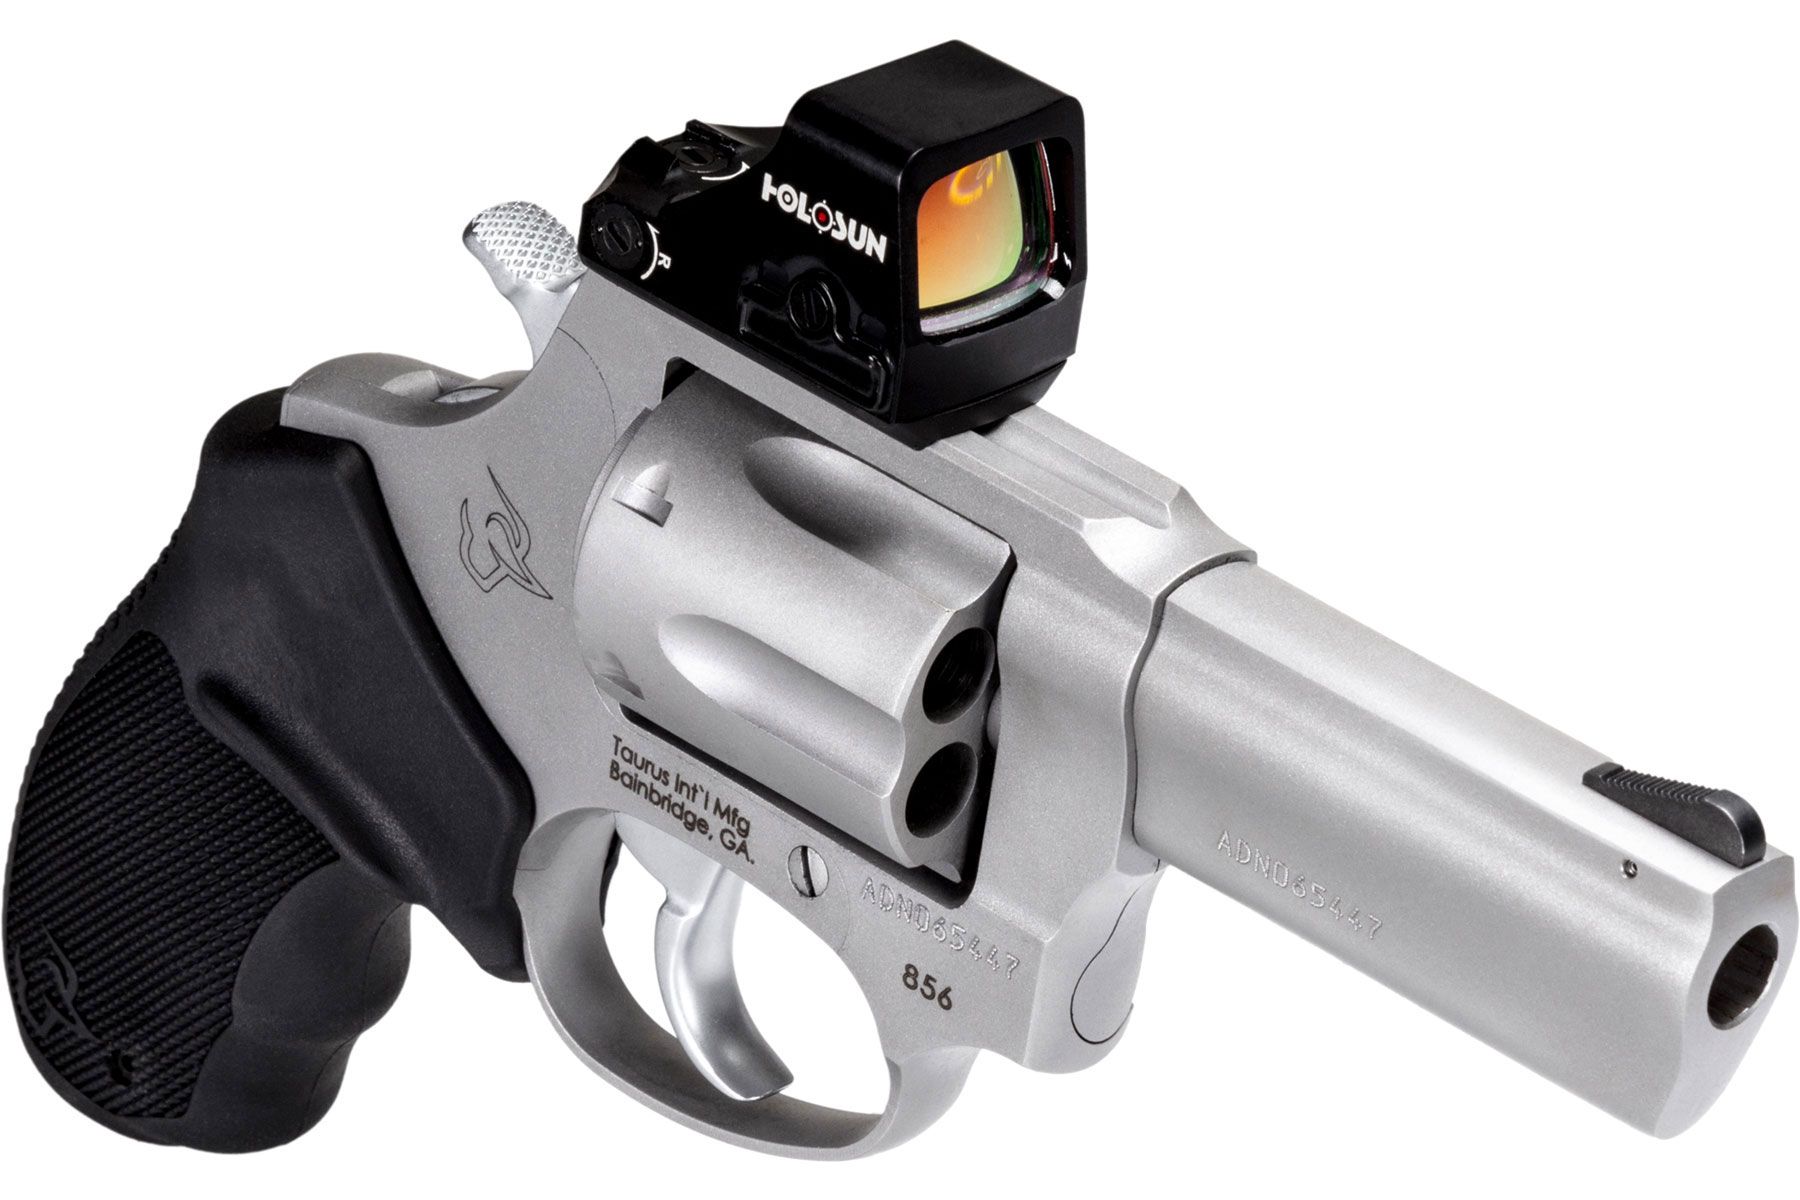 Taurus Defender 856 T.O.R.O. 38 Spl +P Stainless Steel 3.00 in. First Ever Optics Ready Revolver